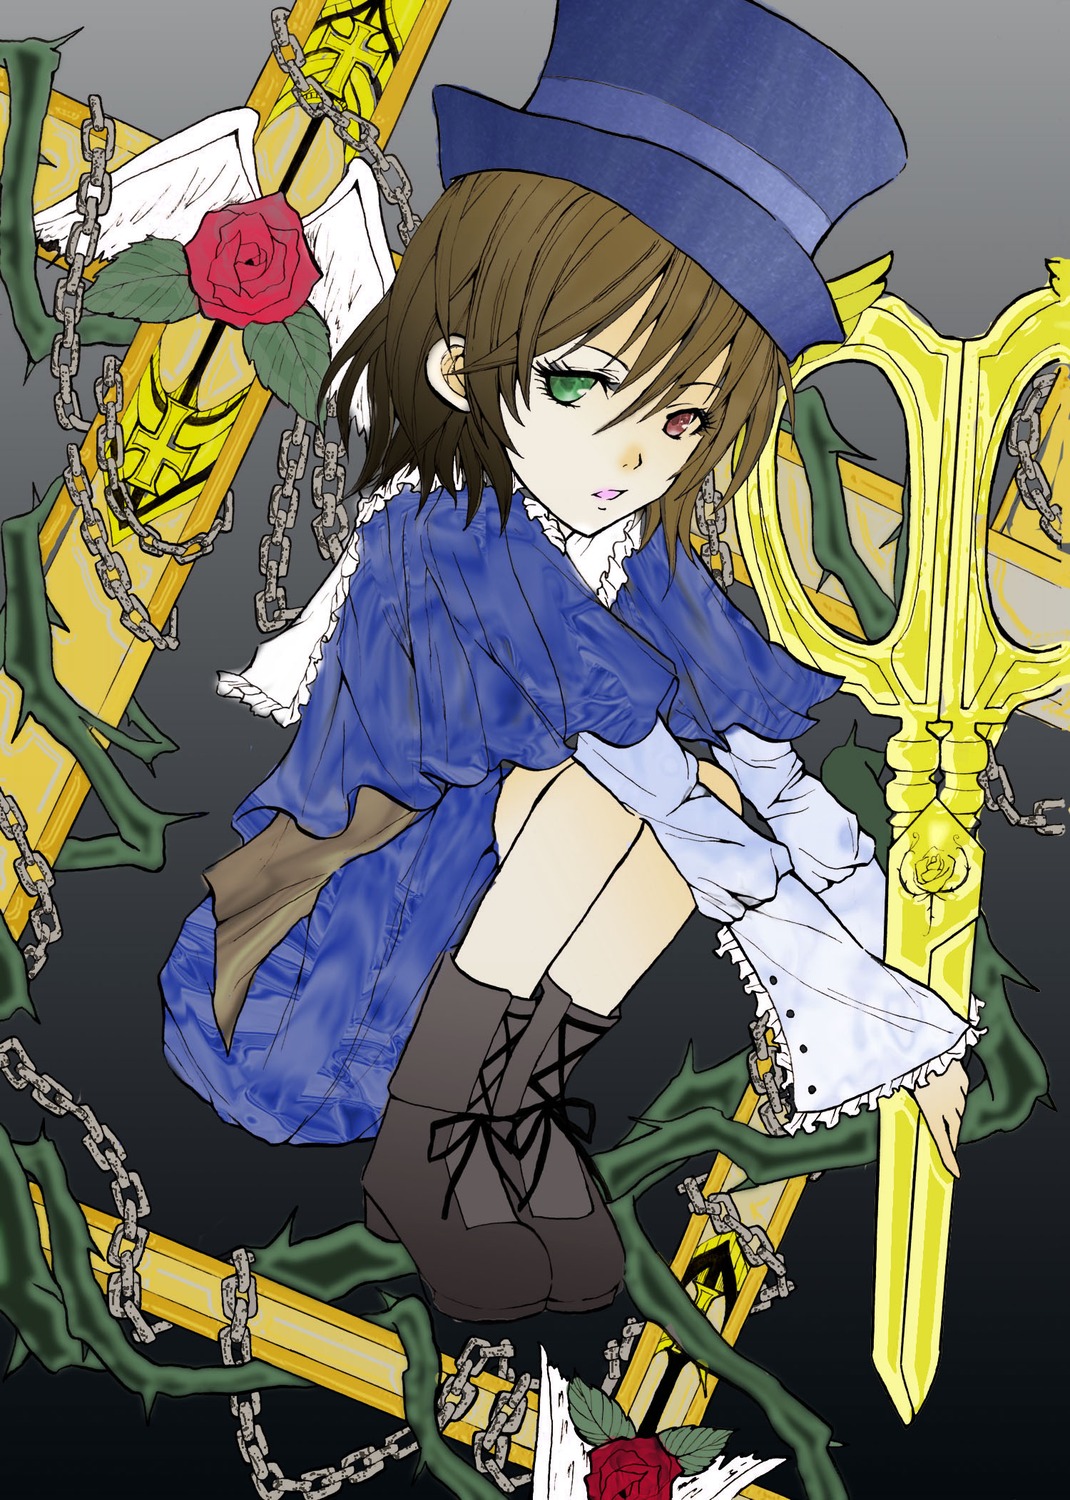 1girl anchor boots broken broken_chain brown_hair chain chained clock cuffs flail flower green_eyes handcuffs hat heterochromia image key pocket_watch red_eyes red_flower red_rose rose shackles short_hair sitting solo souseiseki swing thorns top_hat watch yellow_flower yellow_rose